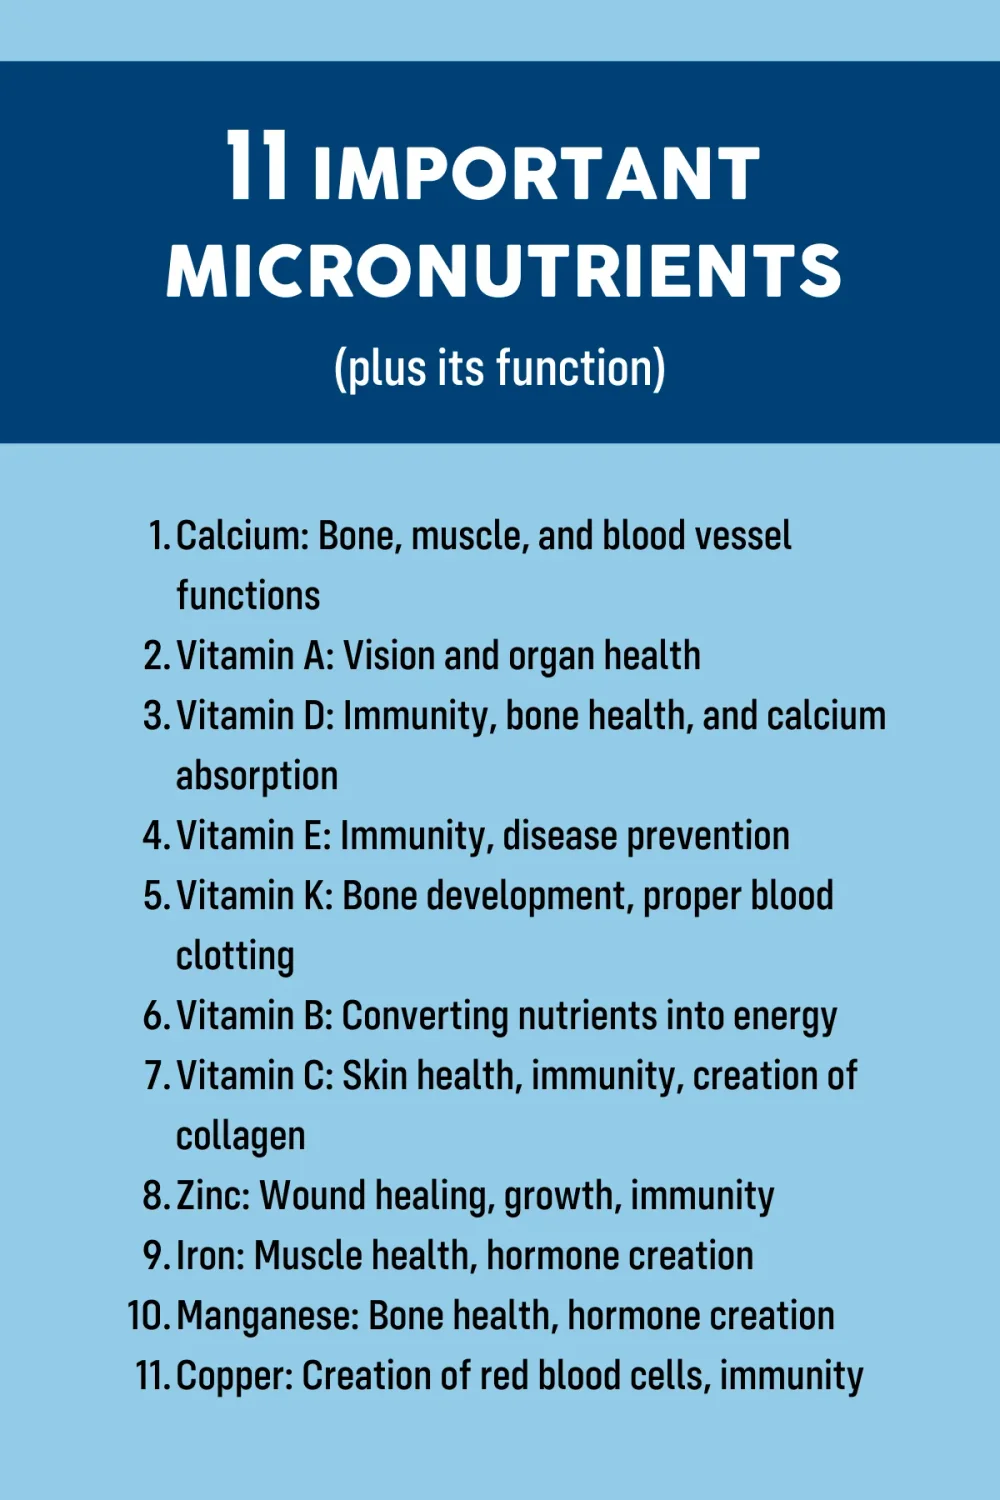 Infographic showing 11 Important Micronutrients plus its function